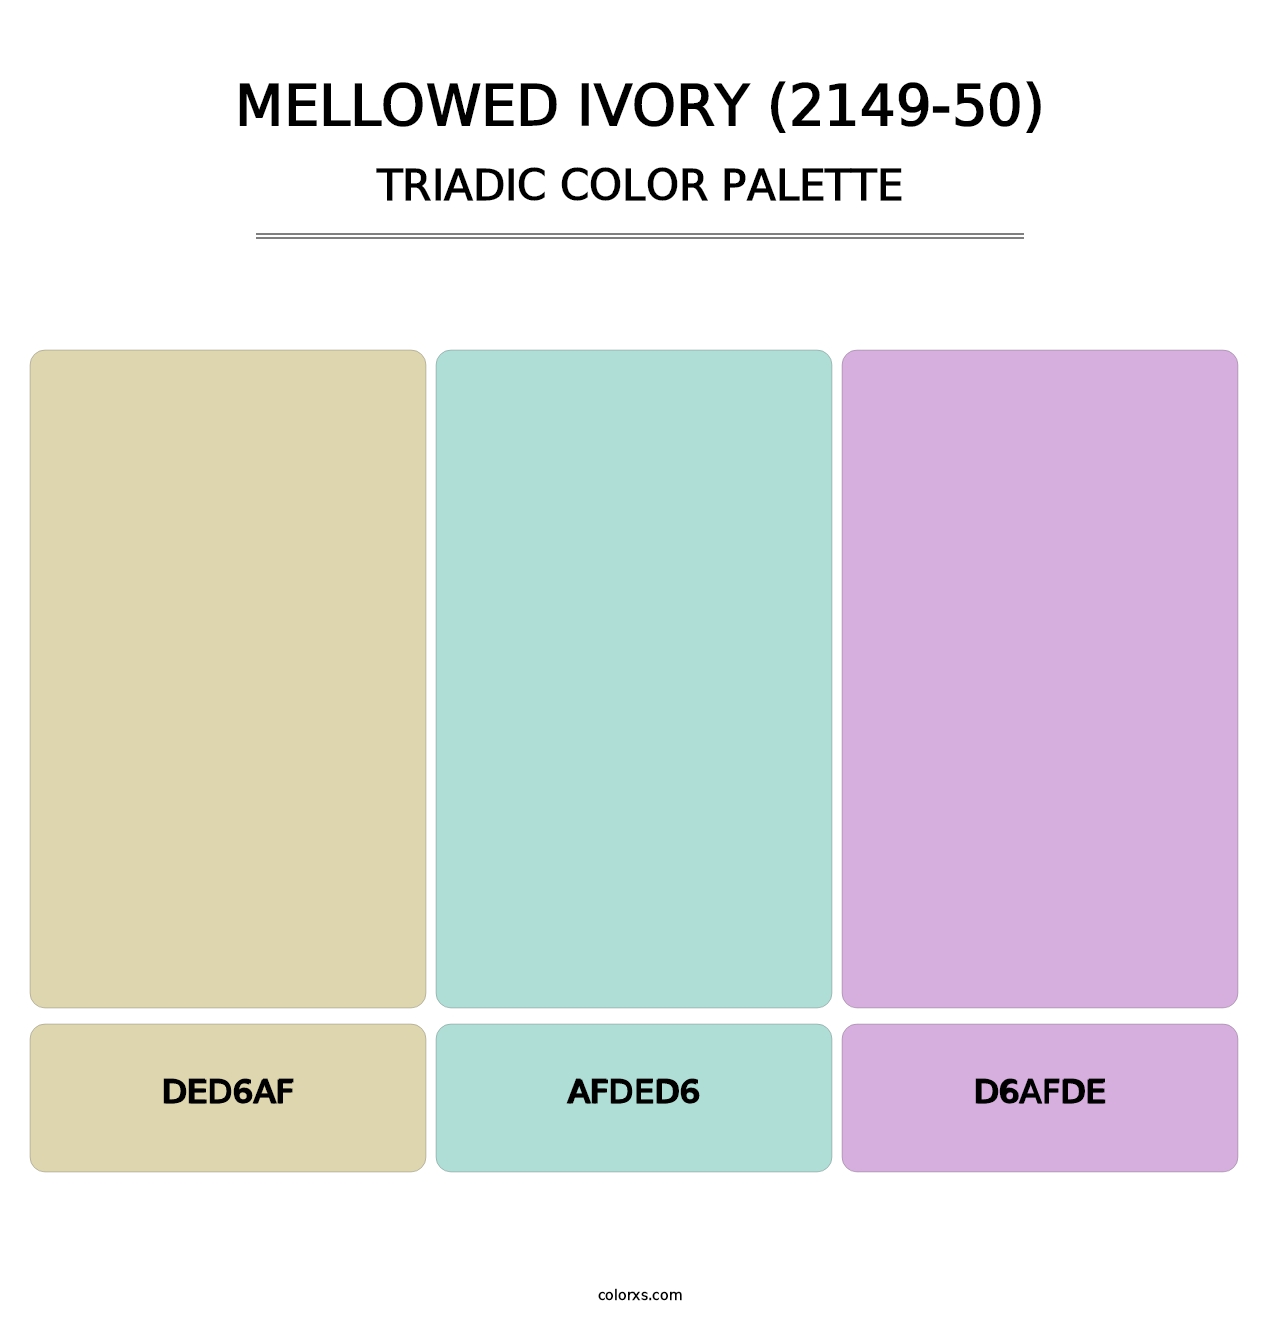 Mellowed Ivory (2149-50) - Triadic Color Palette